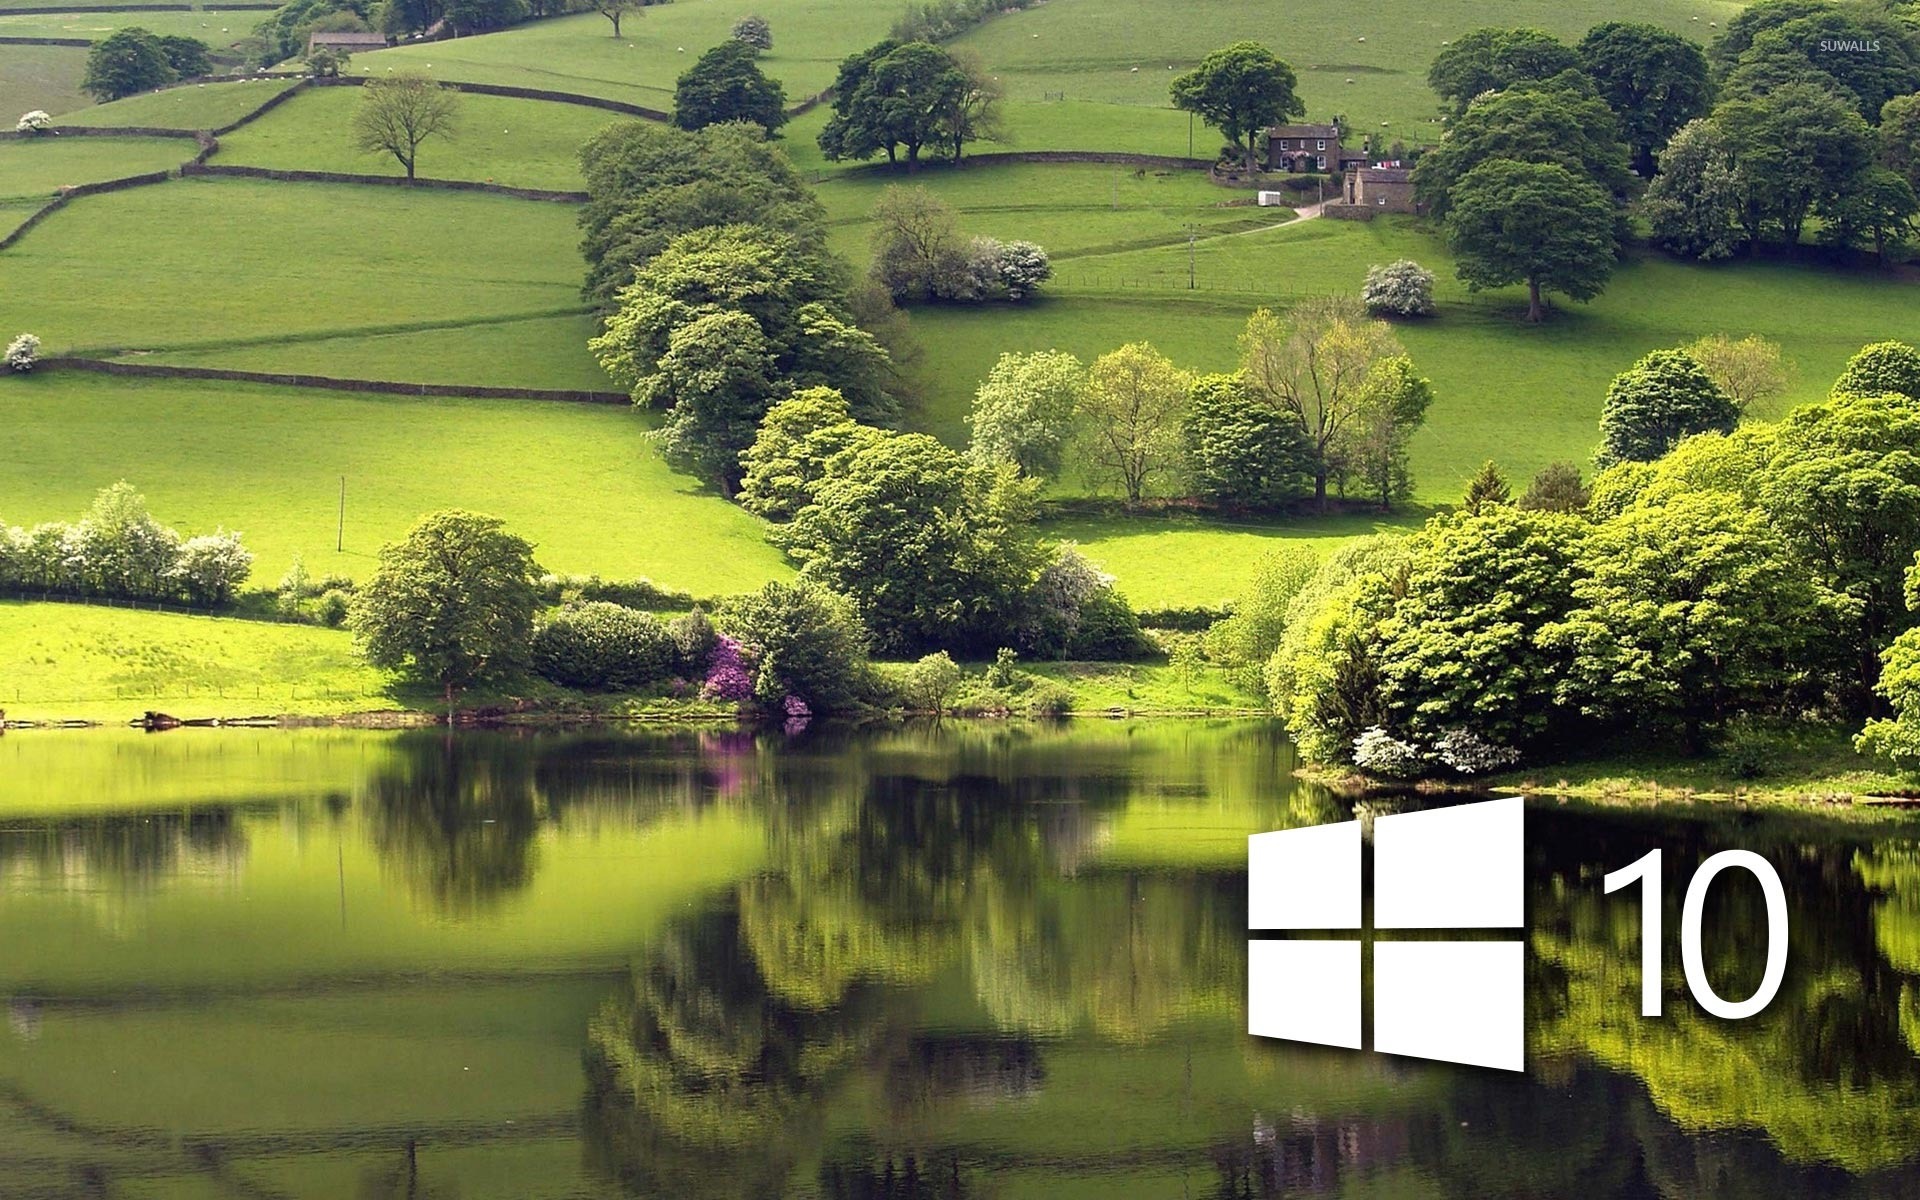 Windows 10 on the green meadow simple logo wallpaper - Computer ...